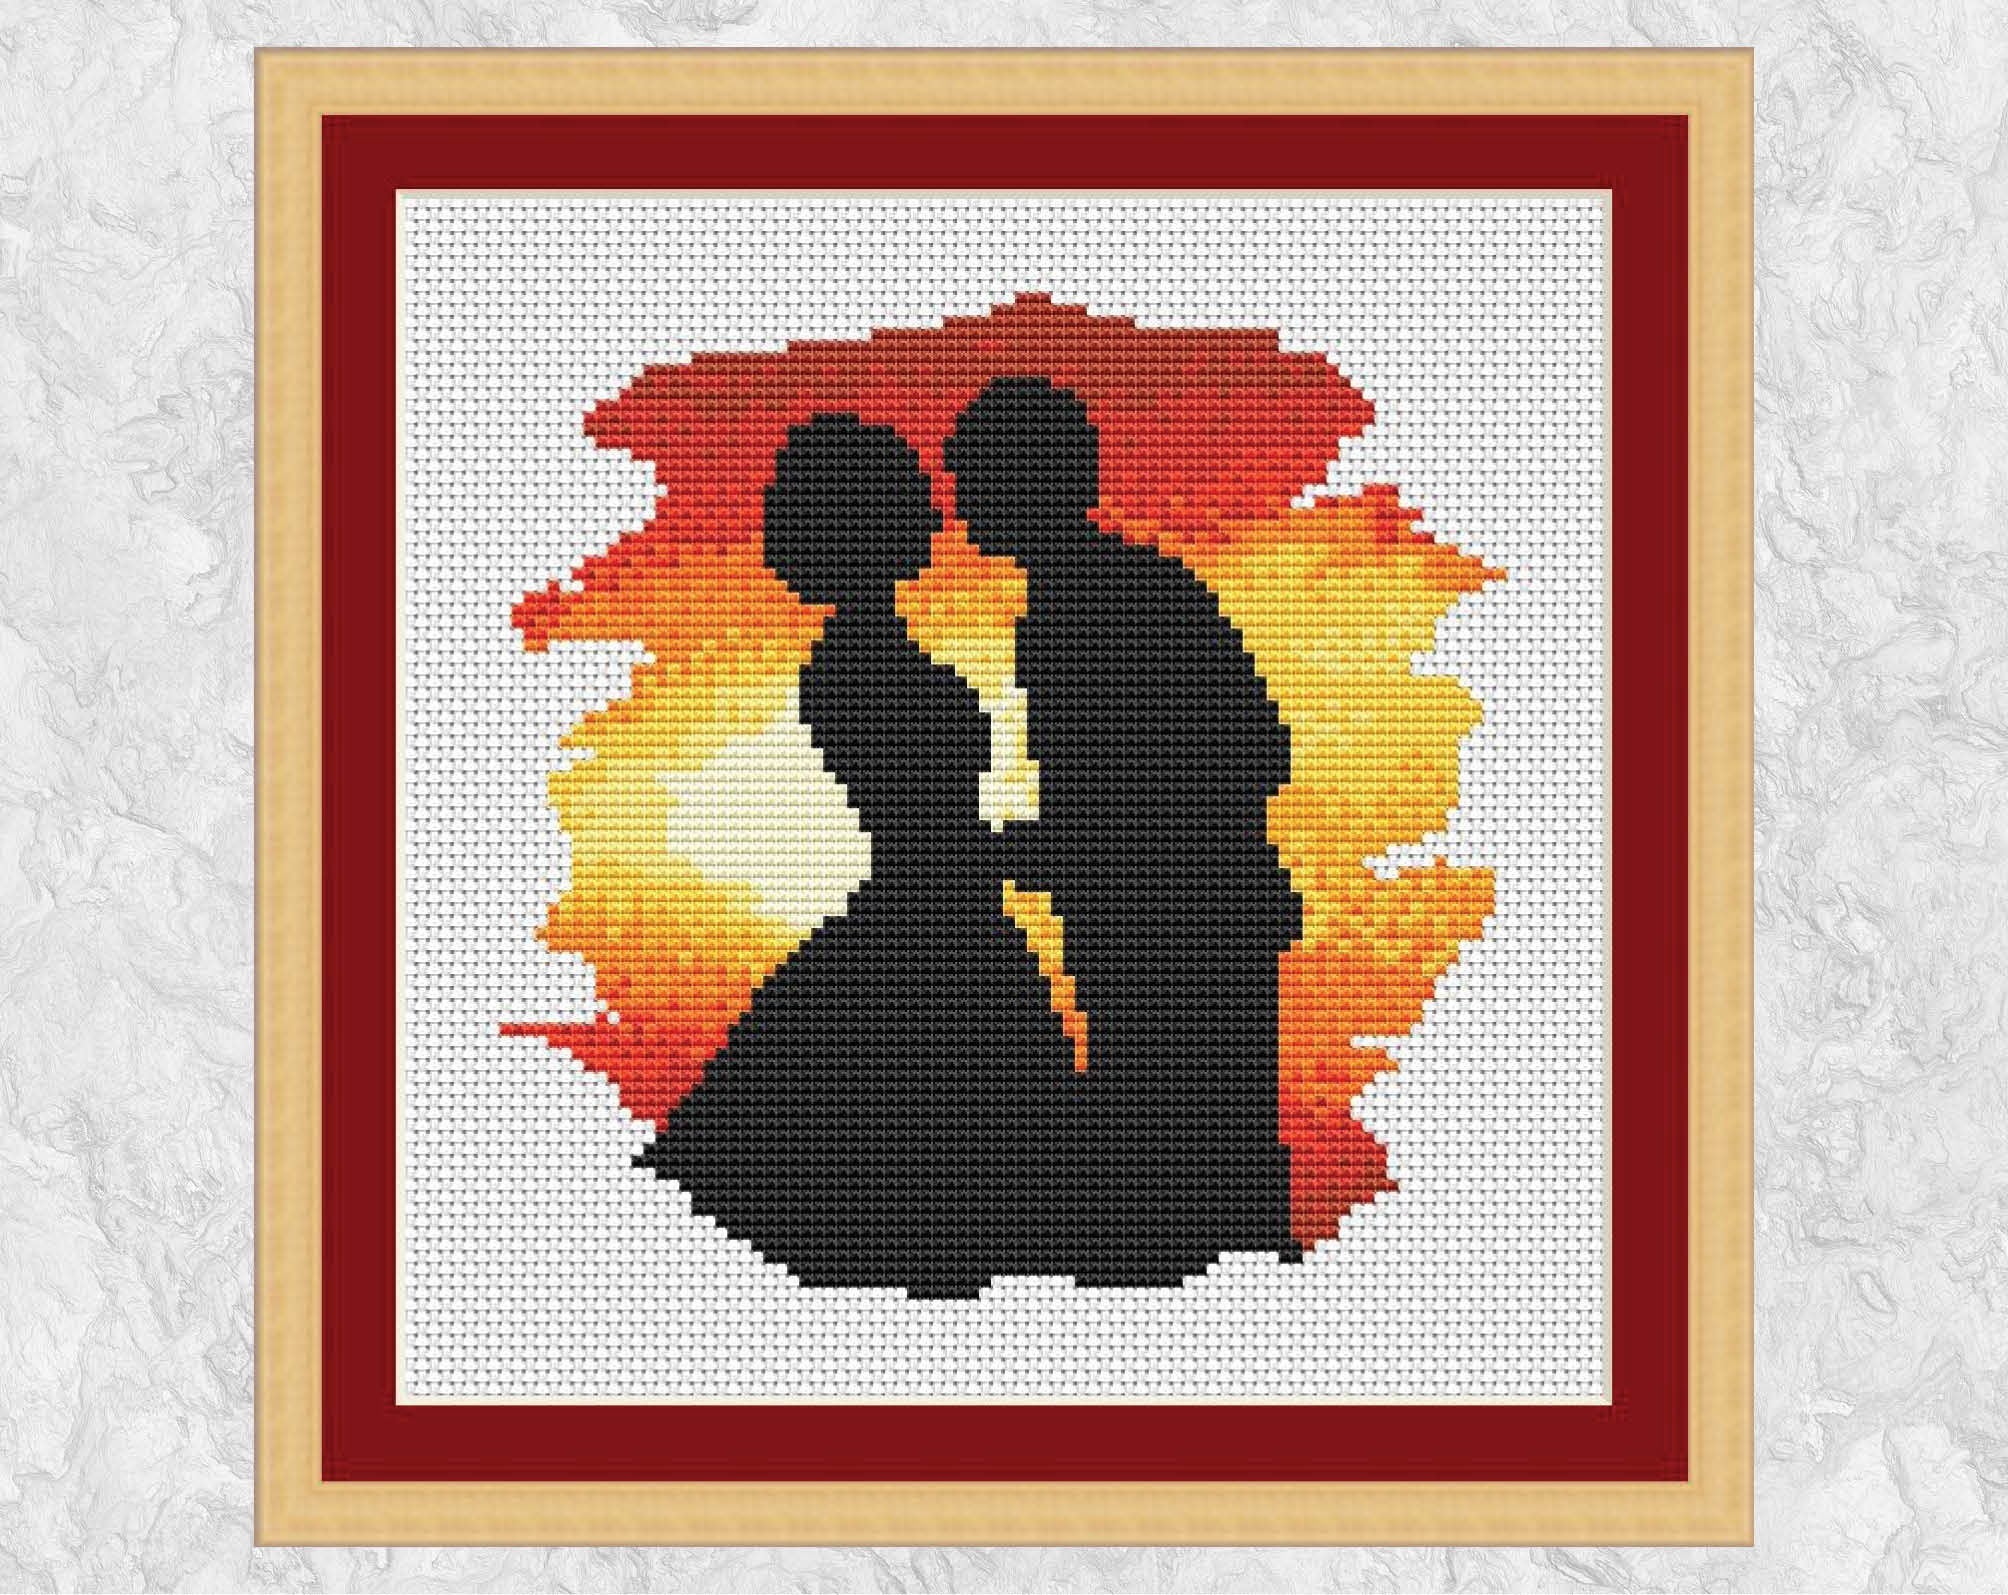 Wedding cross stitch pattern of the silhouette of a bride and groom about to kiss against the backdrop of a sunset. Shown with frame.